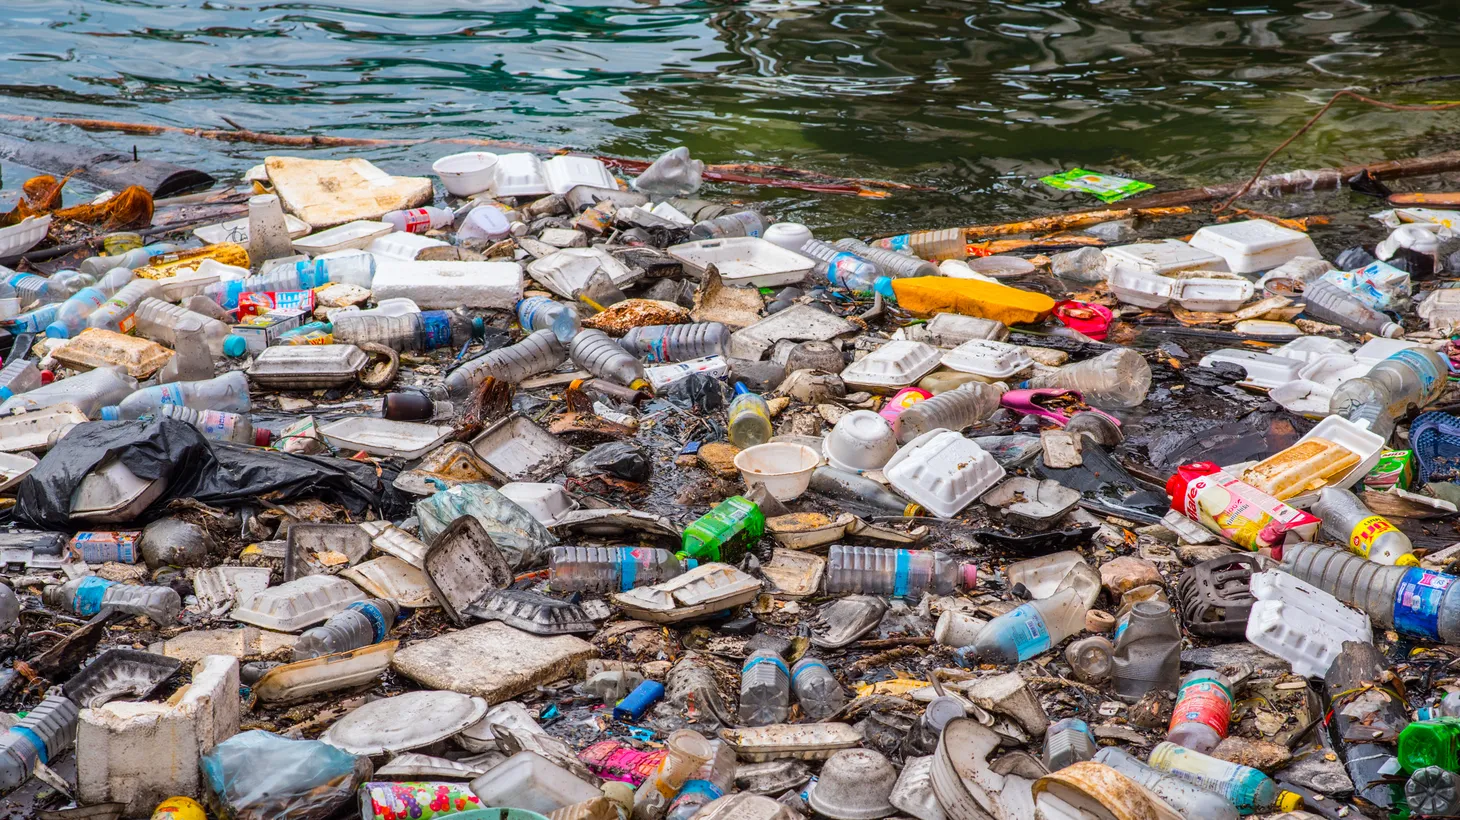 More than half of the plastic trash that makes its way into oceans comes from products and packaging that are not recyclable, according to the National Oceanic and Atmospheric Administration. LA County is now moving to ban those materials at restaurants.